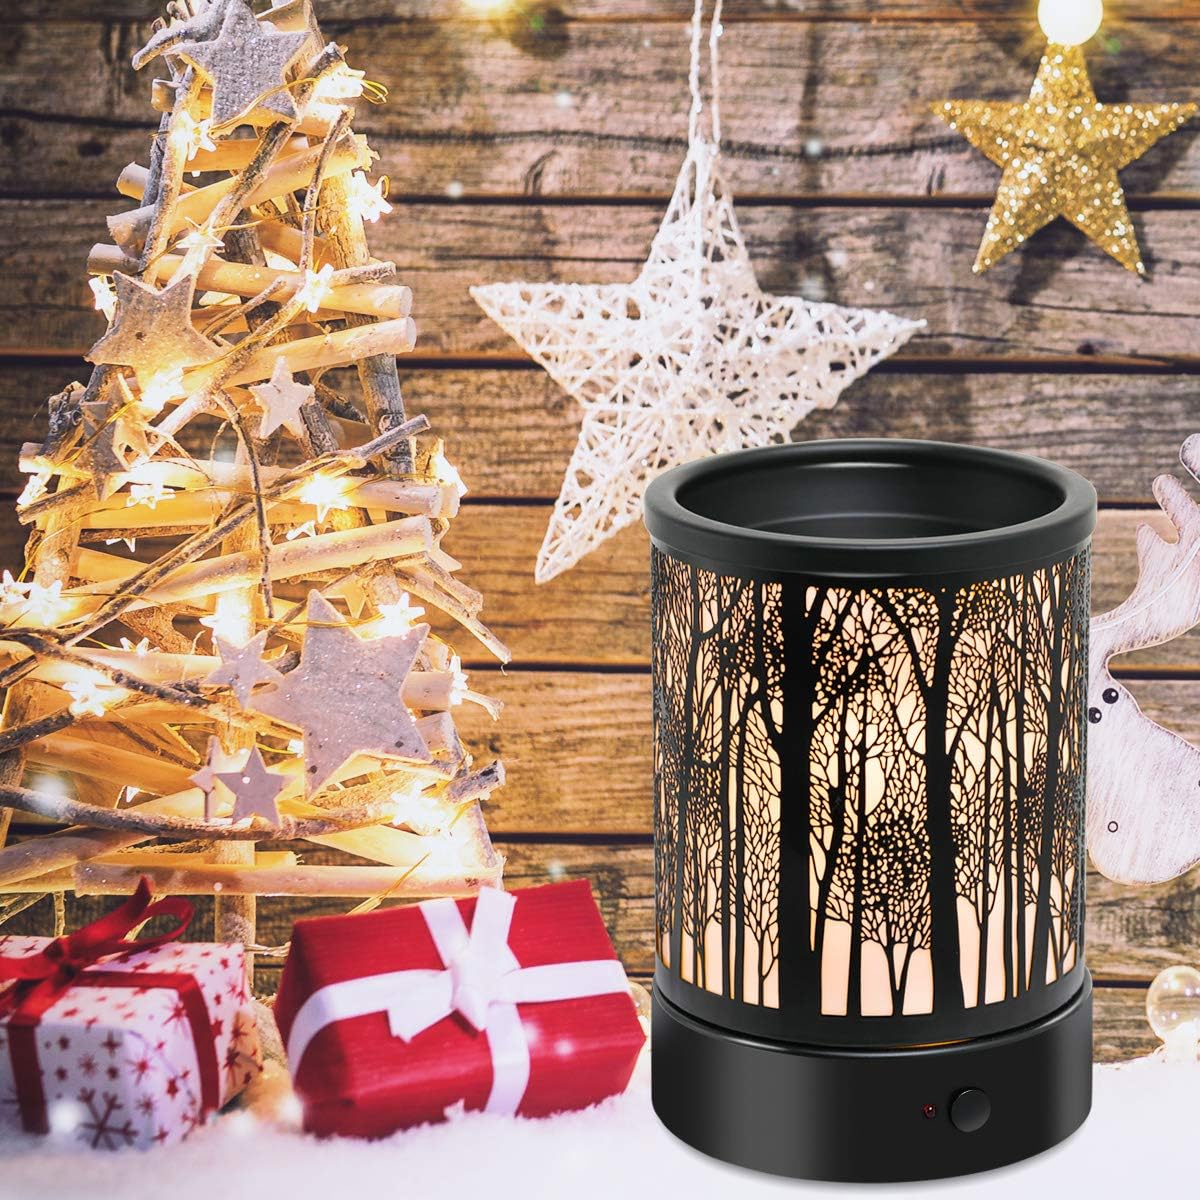 Hituiter Electric Wax Melt Warmer Fragrance Warmer for Scented Wax Melts Classic t Design Home Accessories (Forest animals)